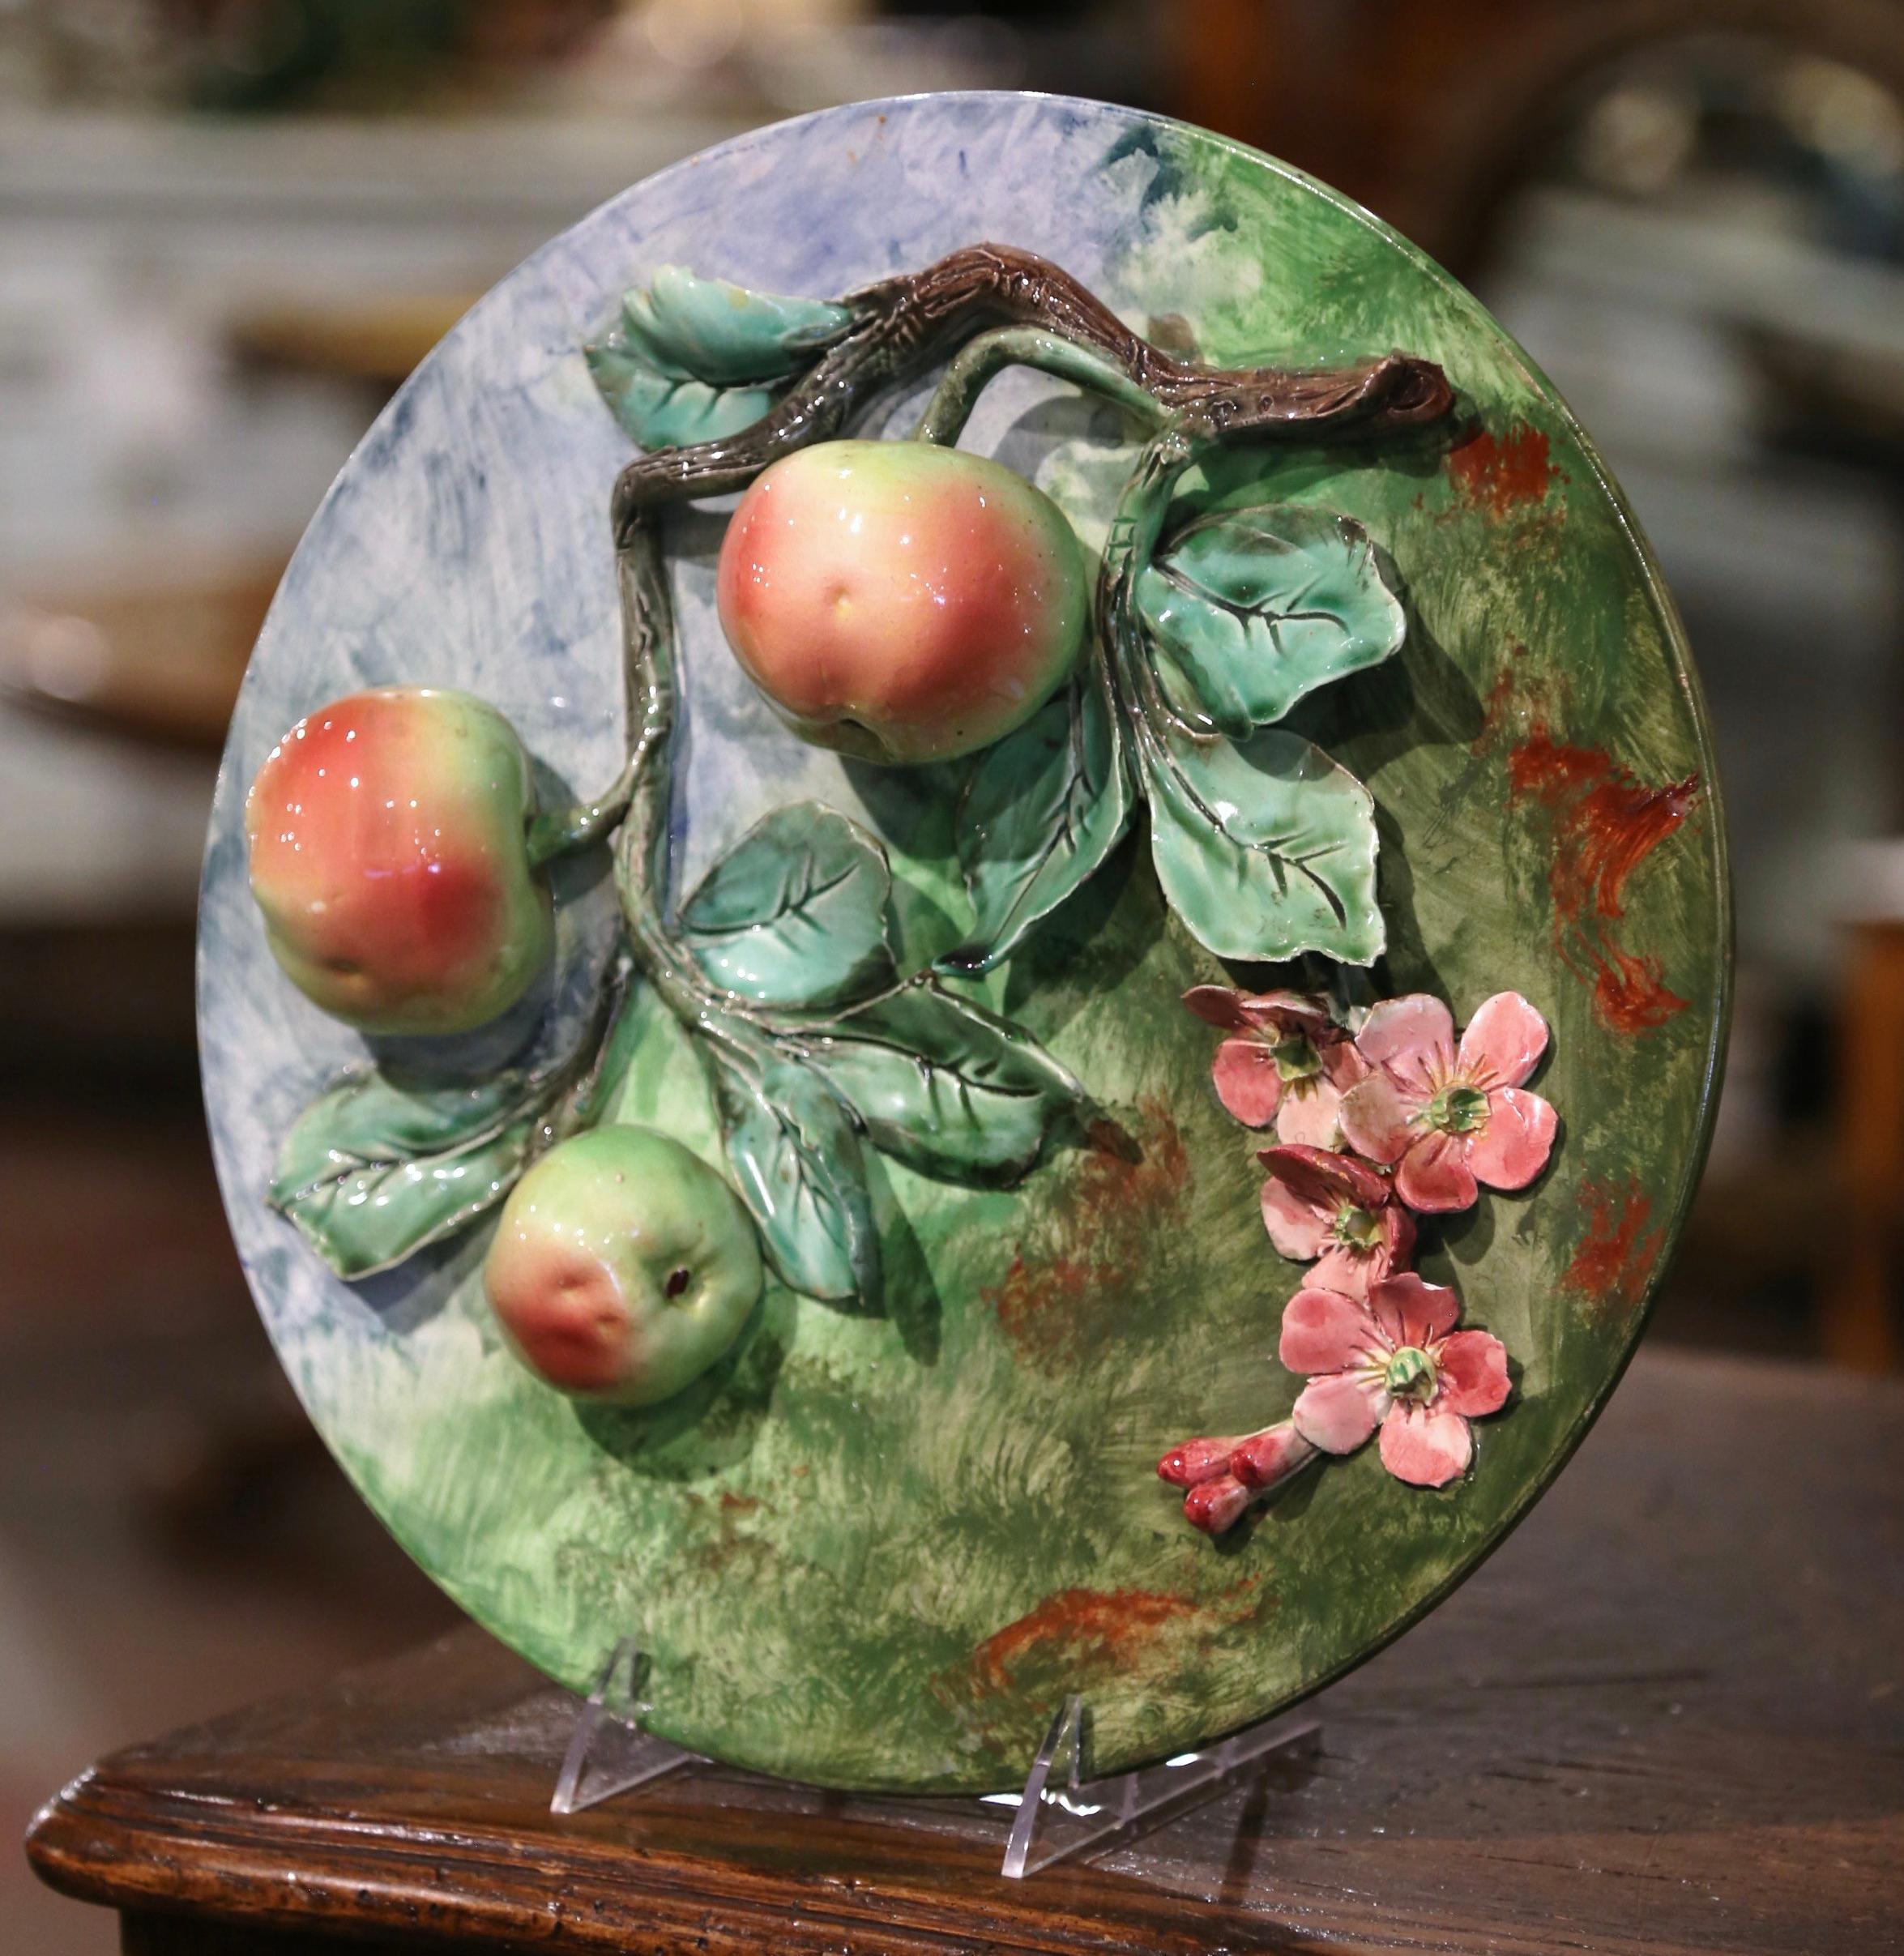 This colorful, antique Majolica plate was sculpted in France, circa 1880. The large, round, hand painted platter features pink flowers and three red and yellow apples hanging from a tree branch covered with green leaves. The sculpted additions are